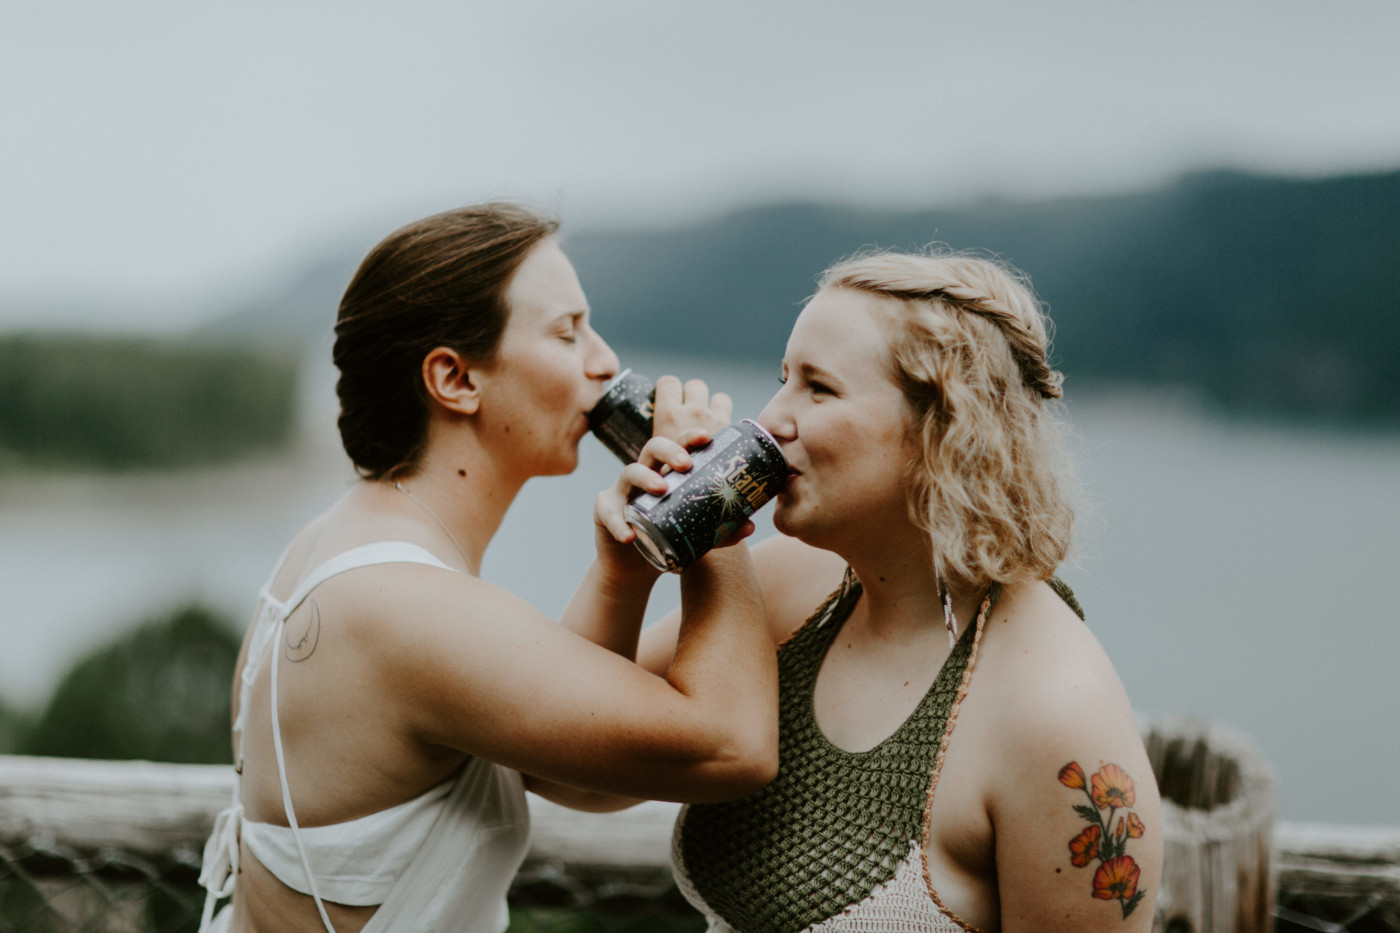 Kate and Audrey take a sip of their drinks. Elopement wedding photography at Bridal Veil Falls by Sienna Plus Josh.